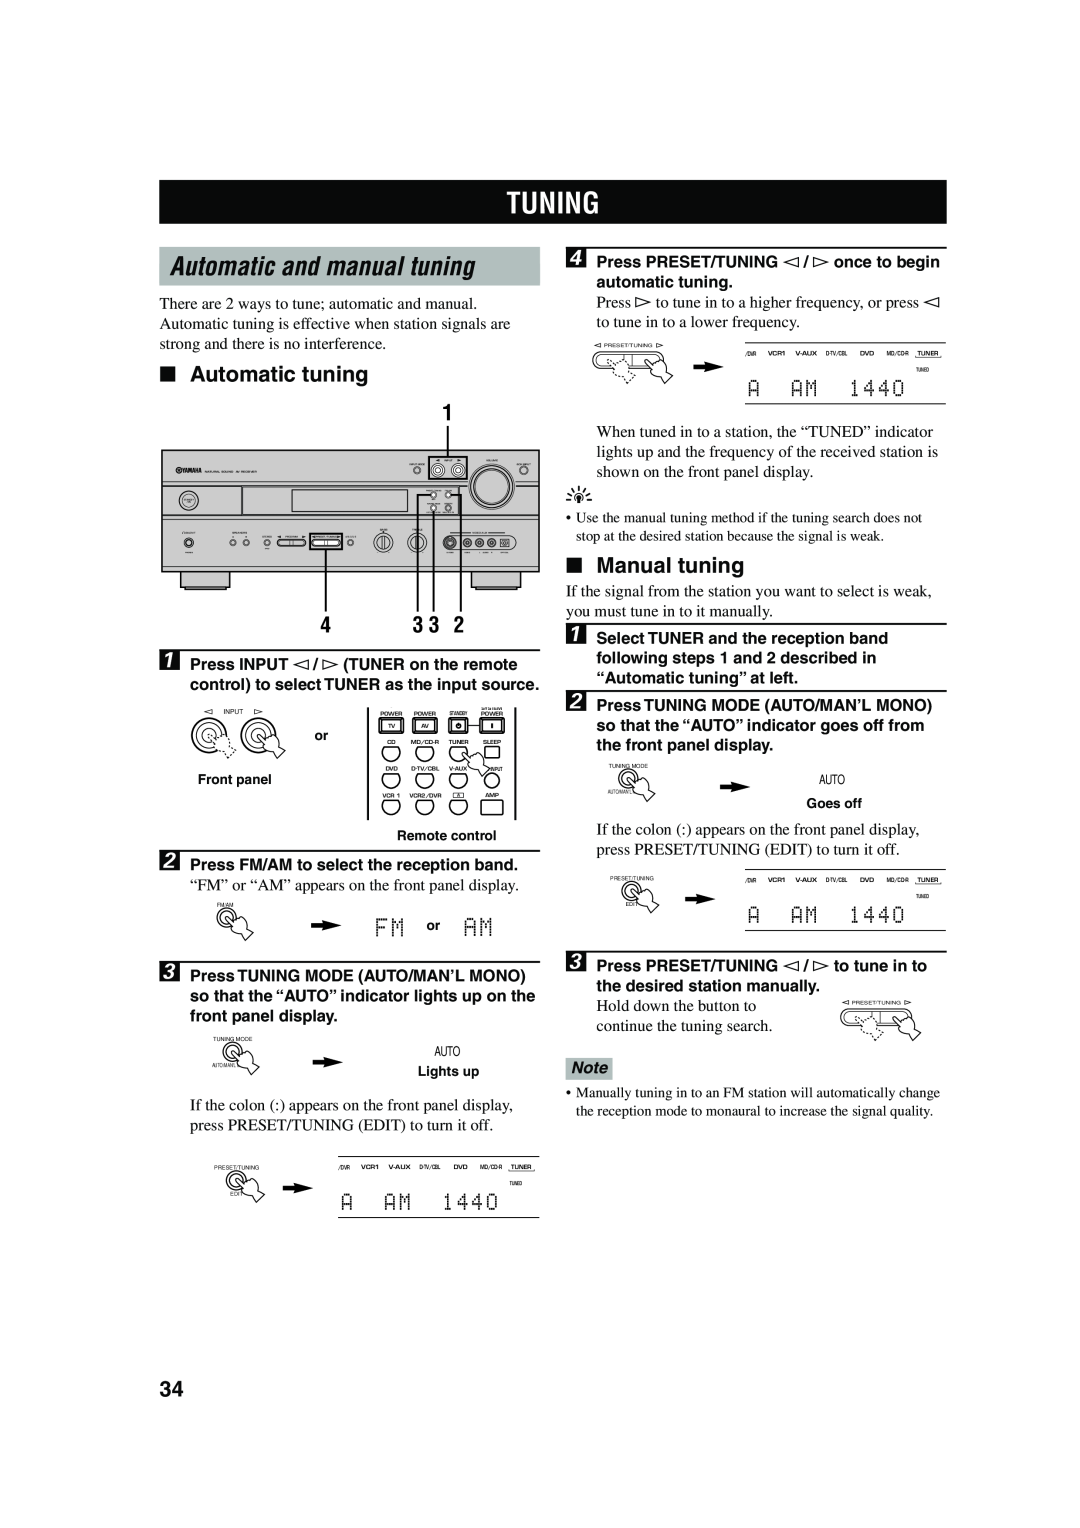 Yamaha HTR-5560 owner manual Tuning, Automatic and manual tuning, Automatic tuning, A AM 144O, Manual tuning 